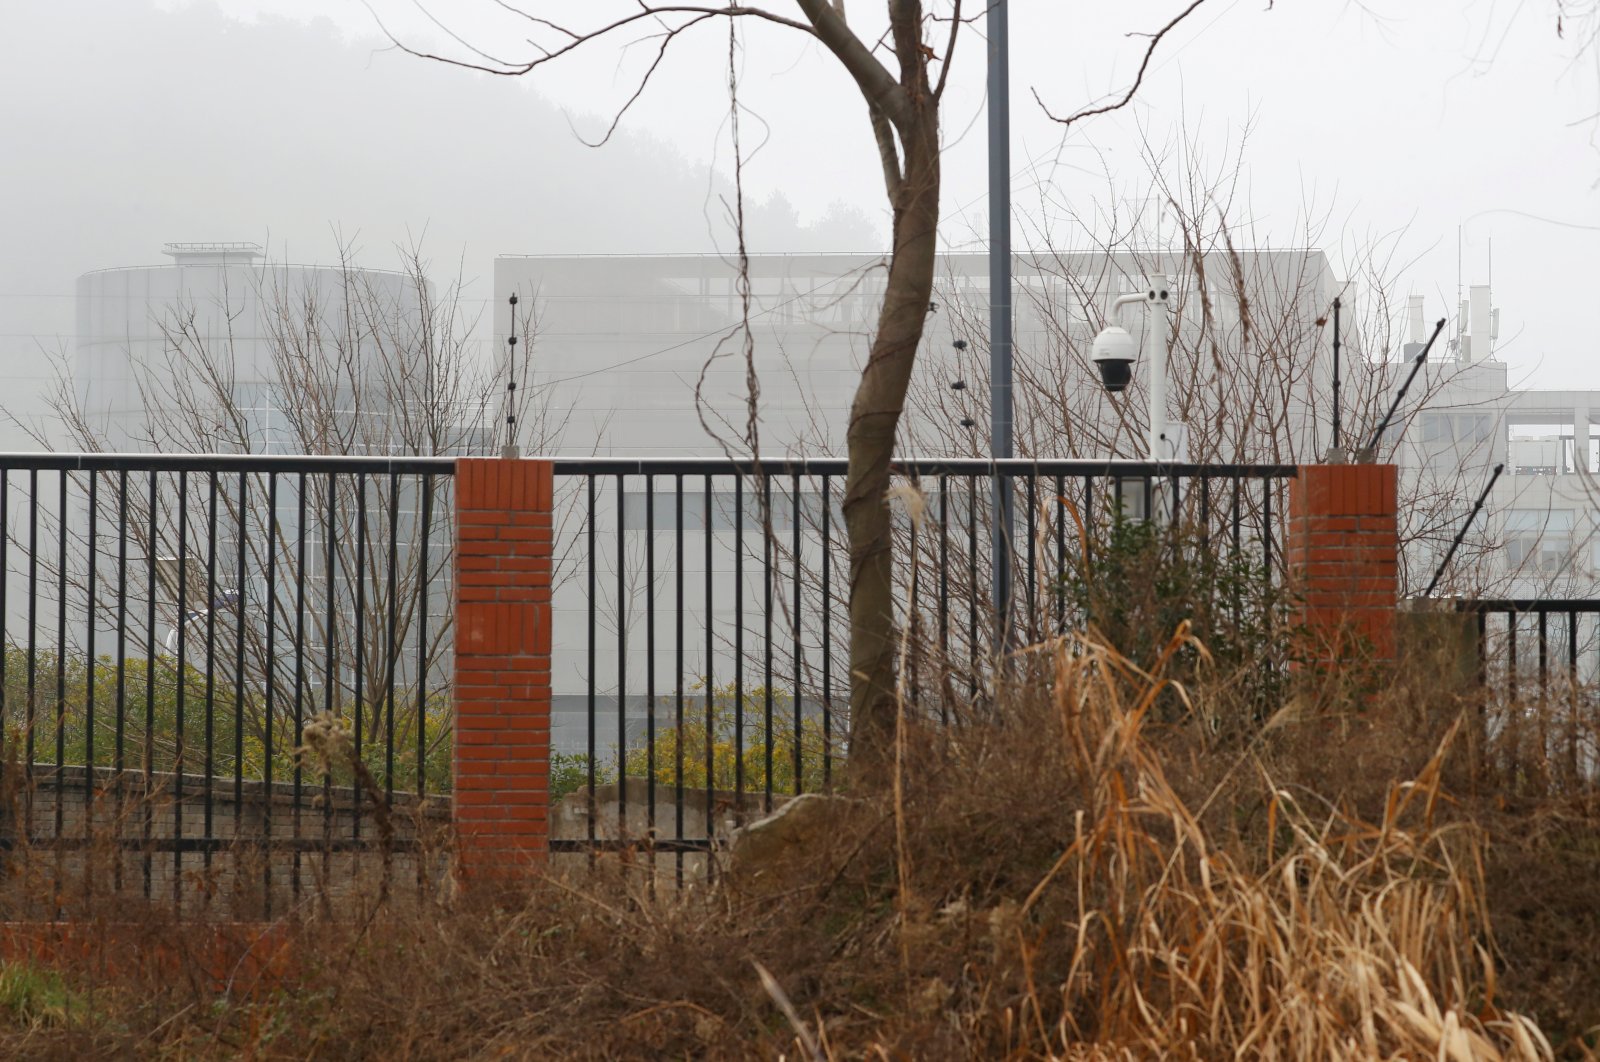 The P4 laboratory of Wuhan Institute of Virology is seen behind a fence during the visit by the World Health Organization (WHO) team tasked with investigating the origins of coronavirus in Wuhan, Hubei province, China Feb. 3, 2021. (Reuters Photo)